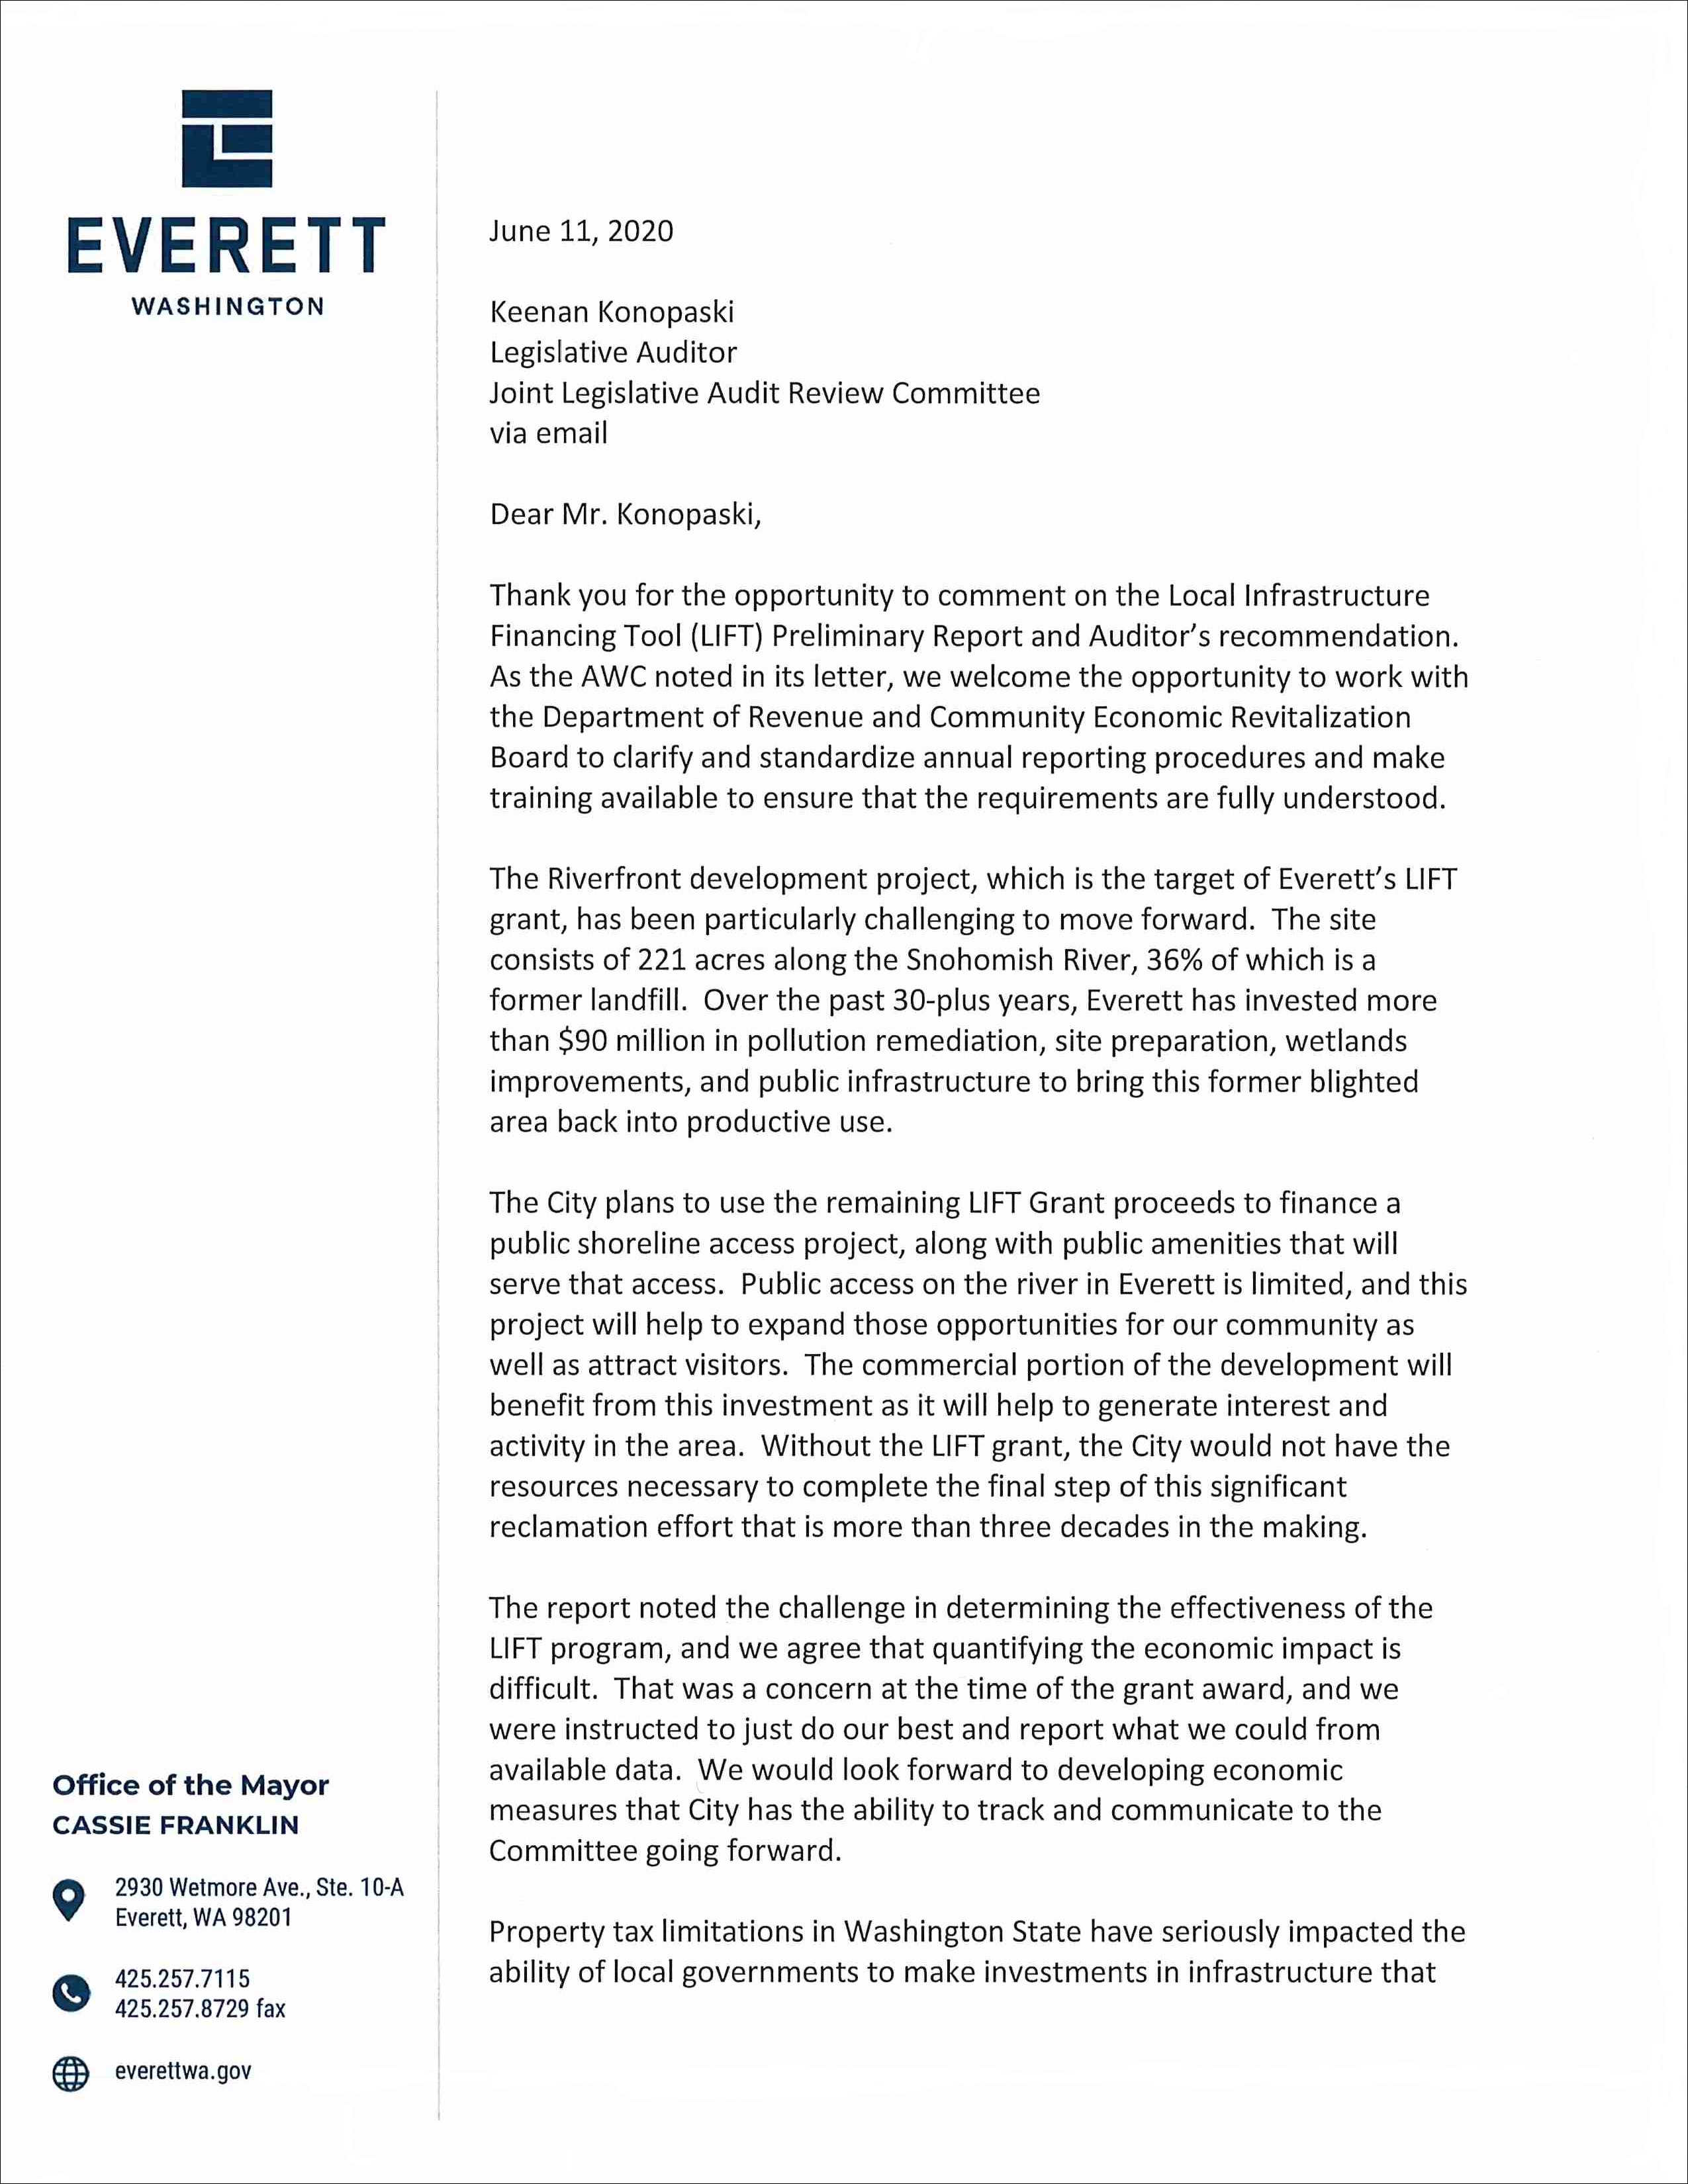 Page one of the City of Everett's response